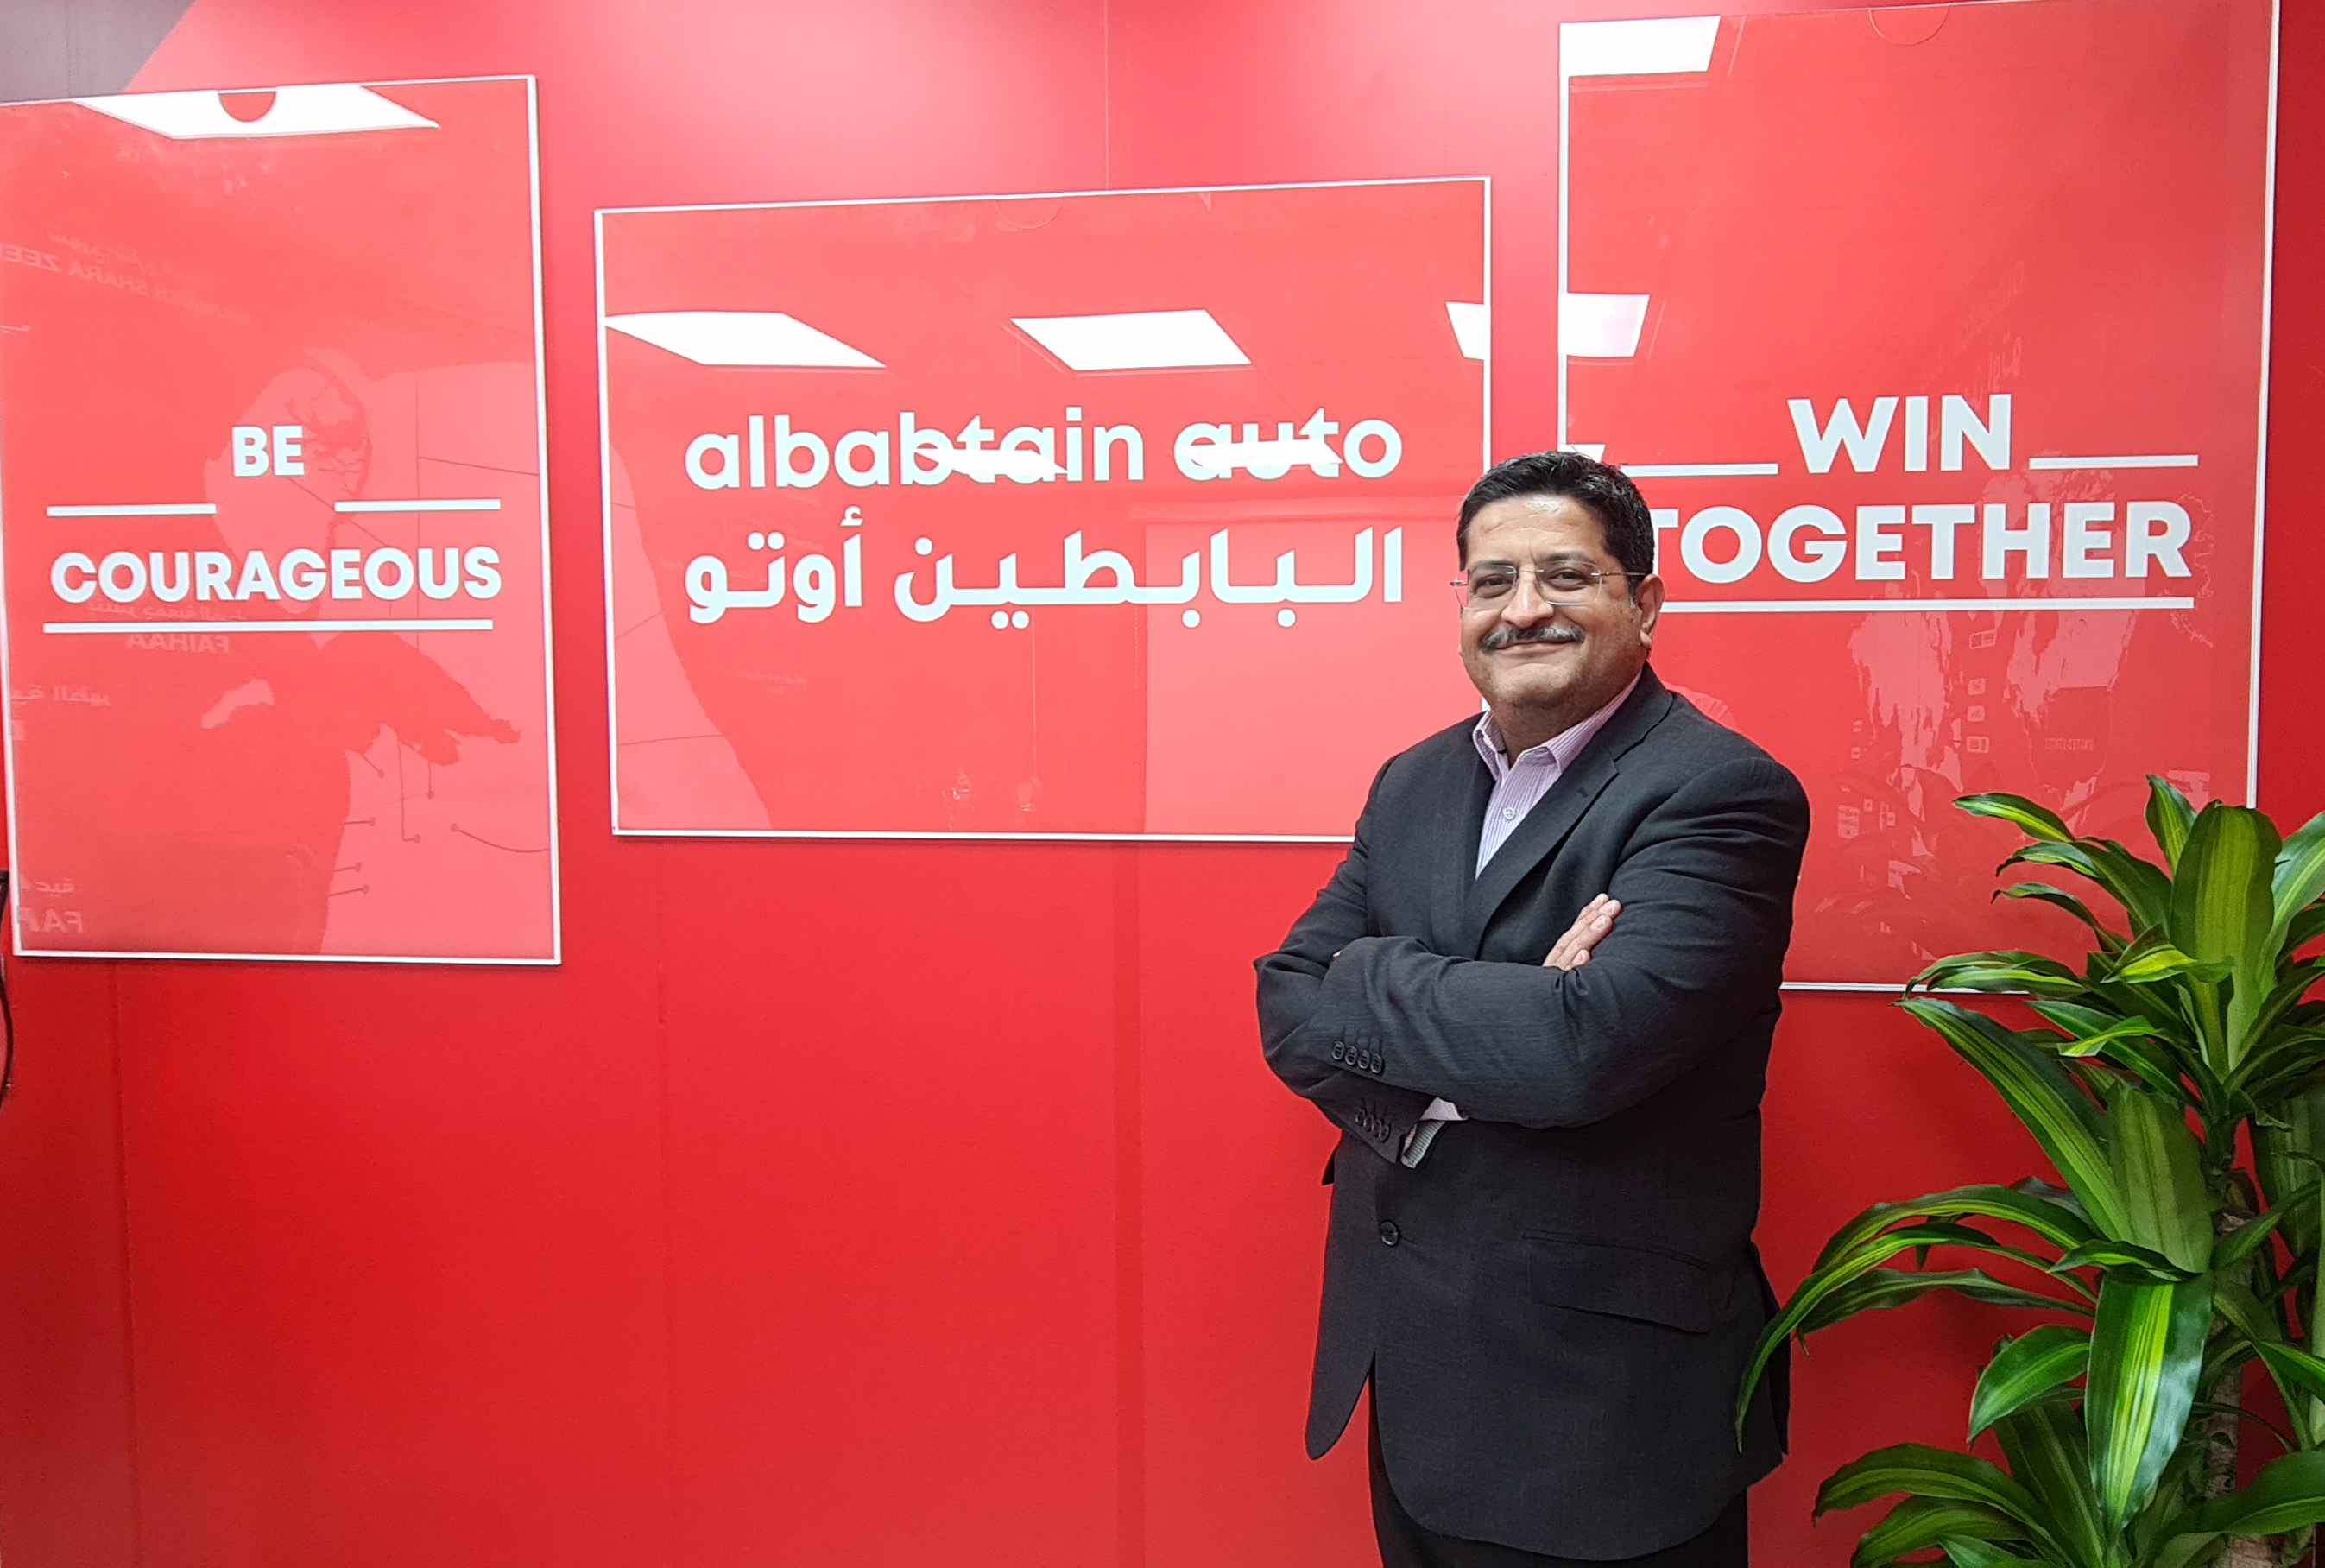 Petronas lubricants international expands Middle East footprint with Kuwait’s al Babtain group